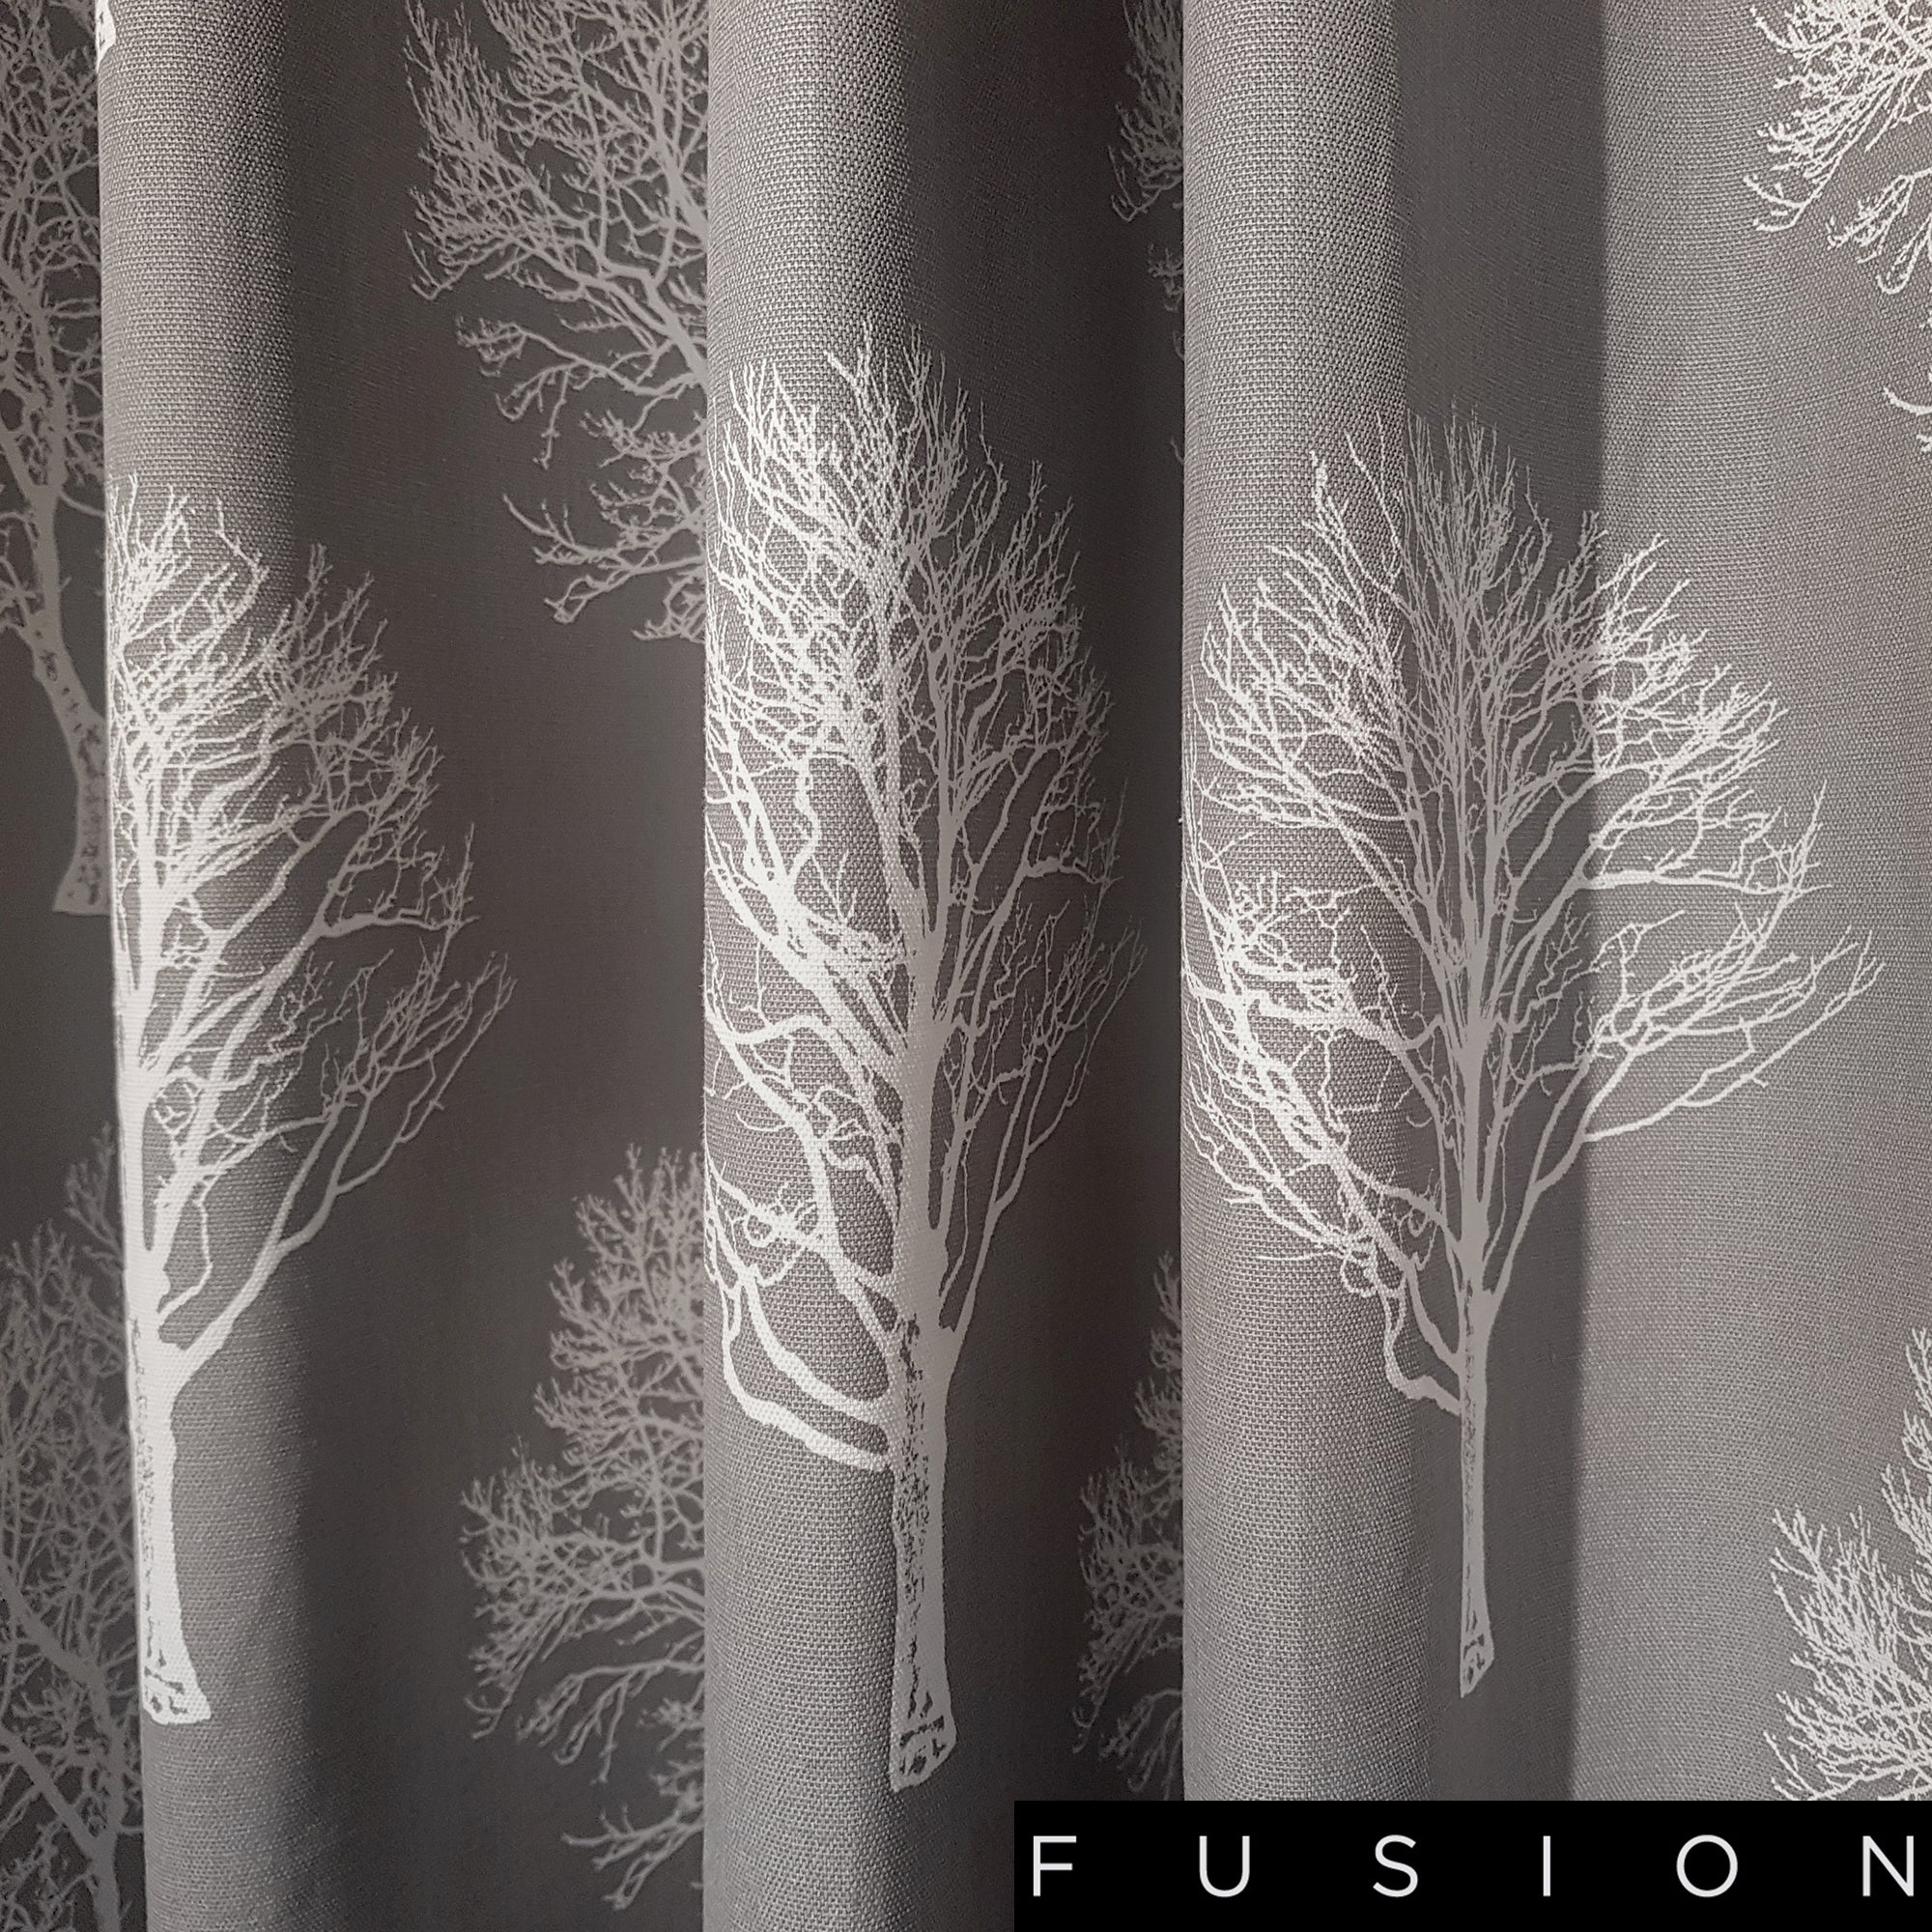 Woodland Trees - 100% Cotton Lined Eyelet Curtains in Charcoal - by Fusion